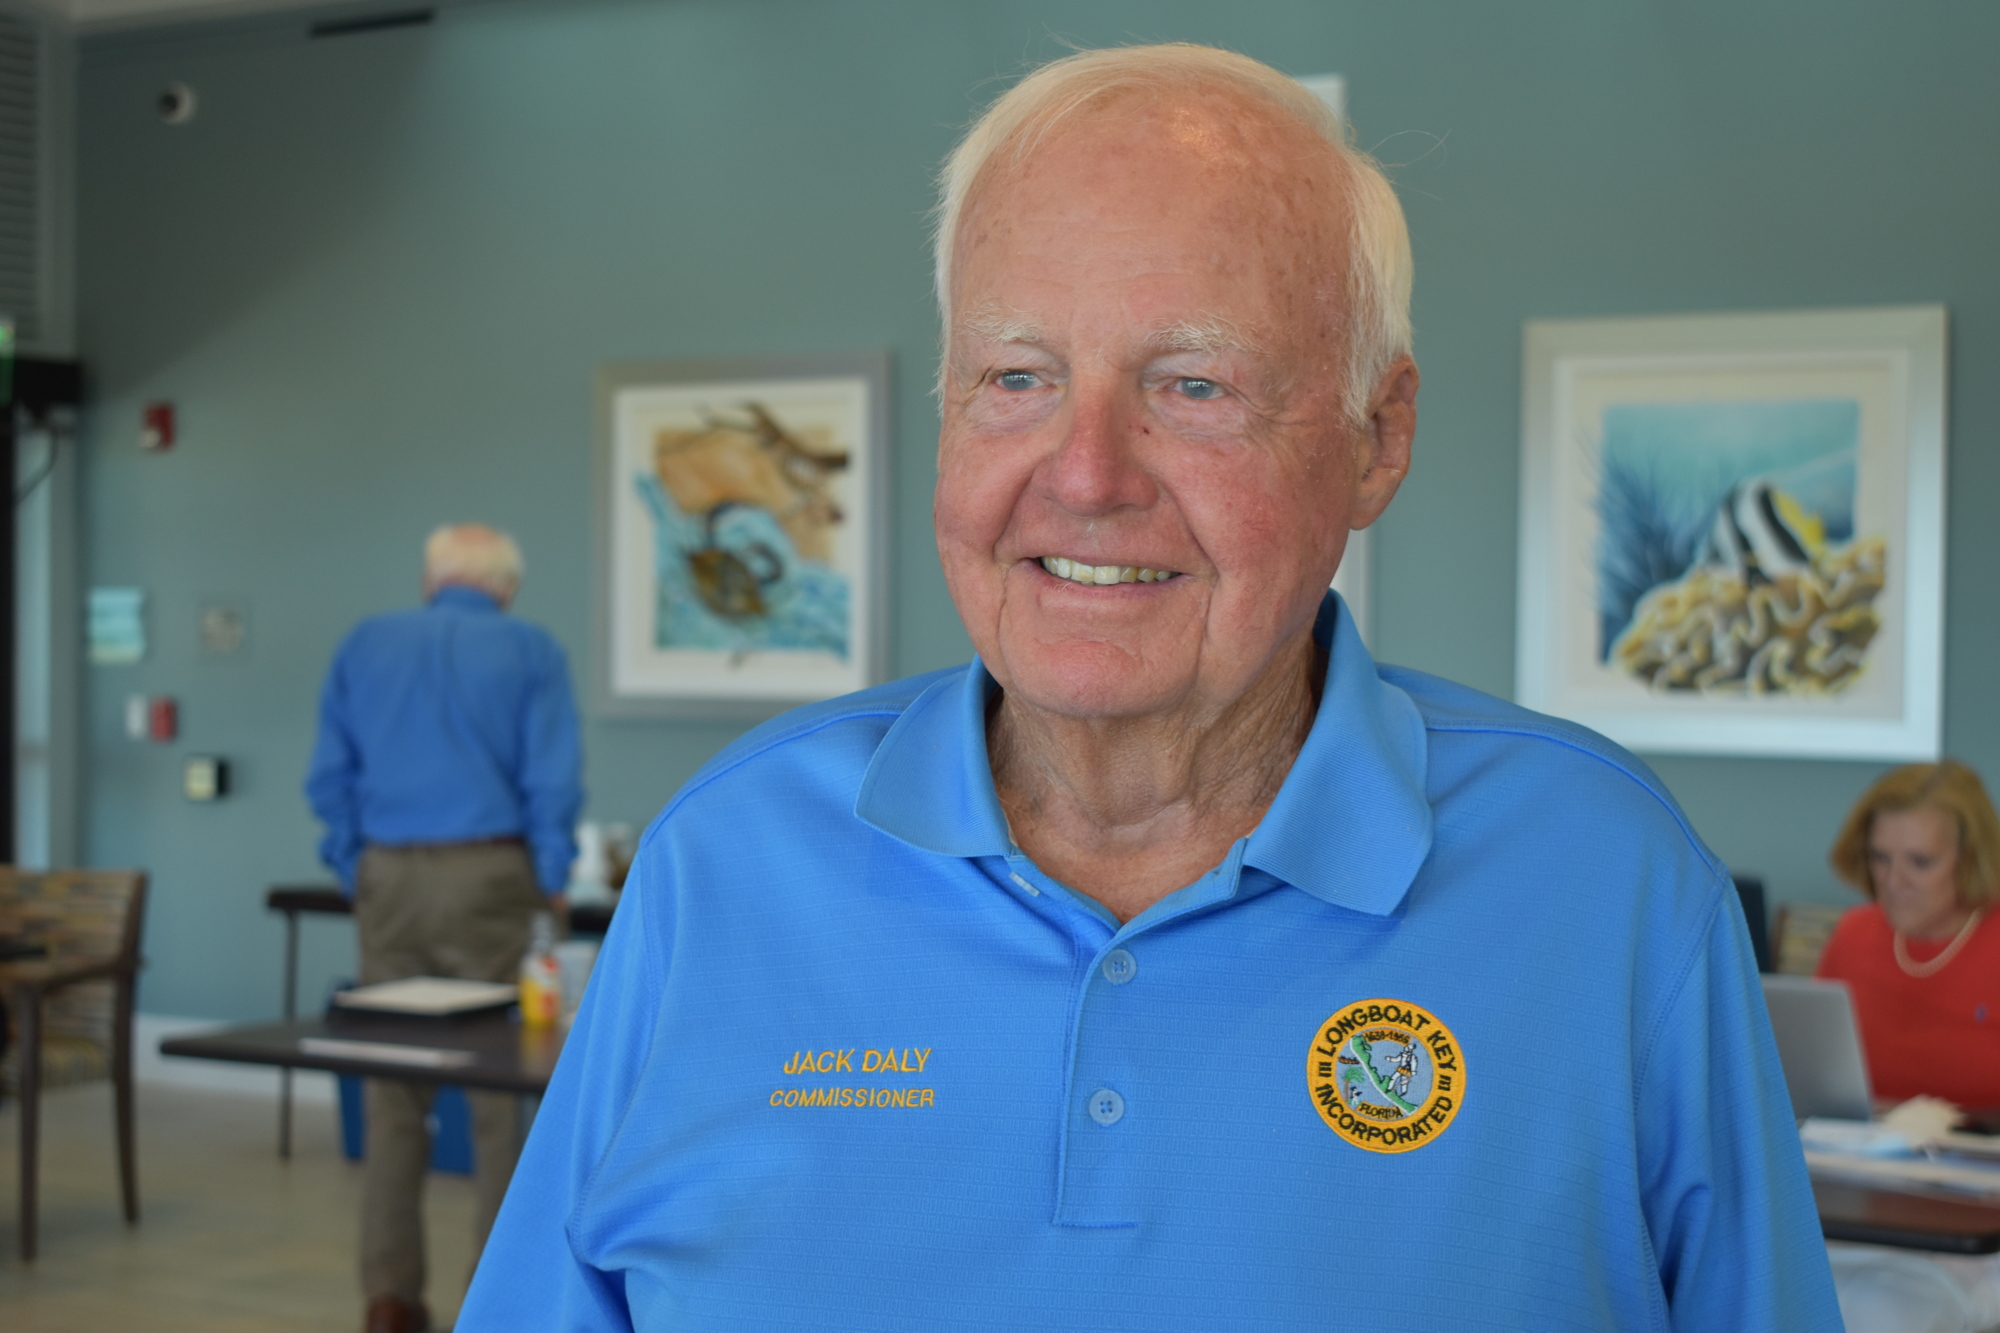 Longboat Key District 4 Commissioner Jack Daly is an advocate of adding overhead pedestrian walkways as part of the planned roundabout at U.S. 41 and Gulfstream Avenue .